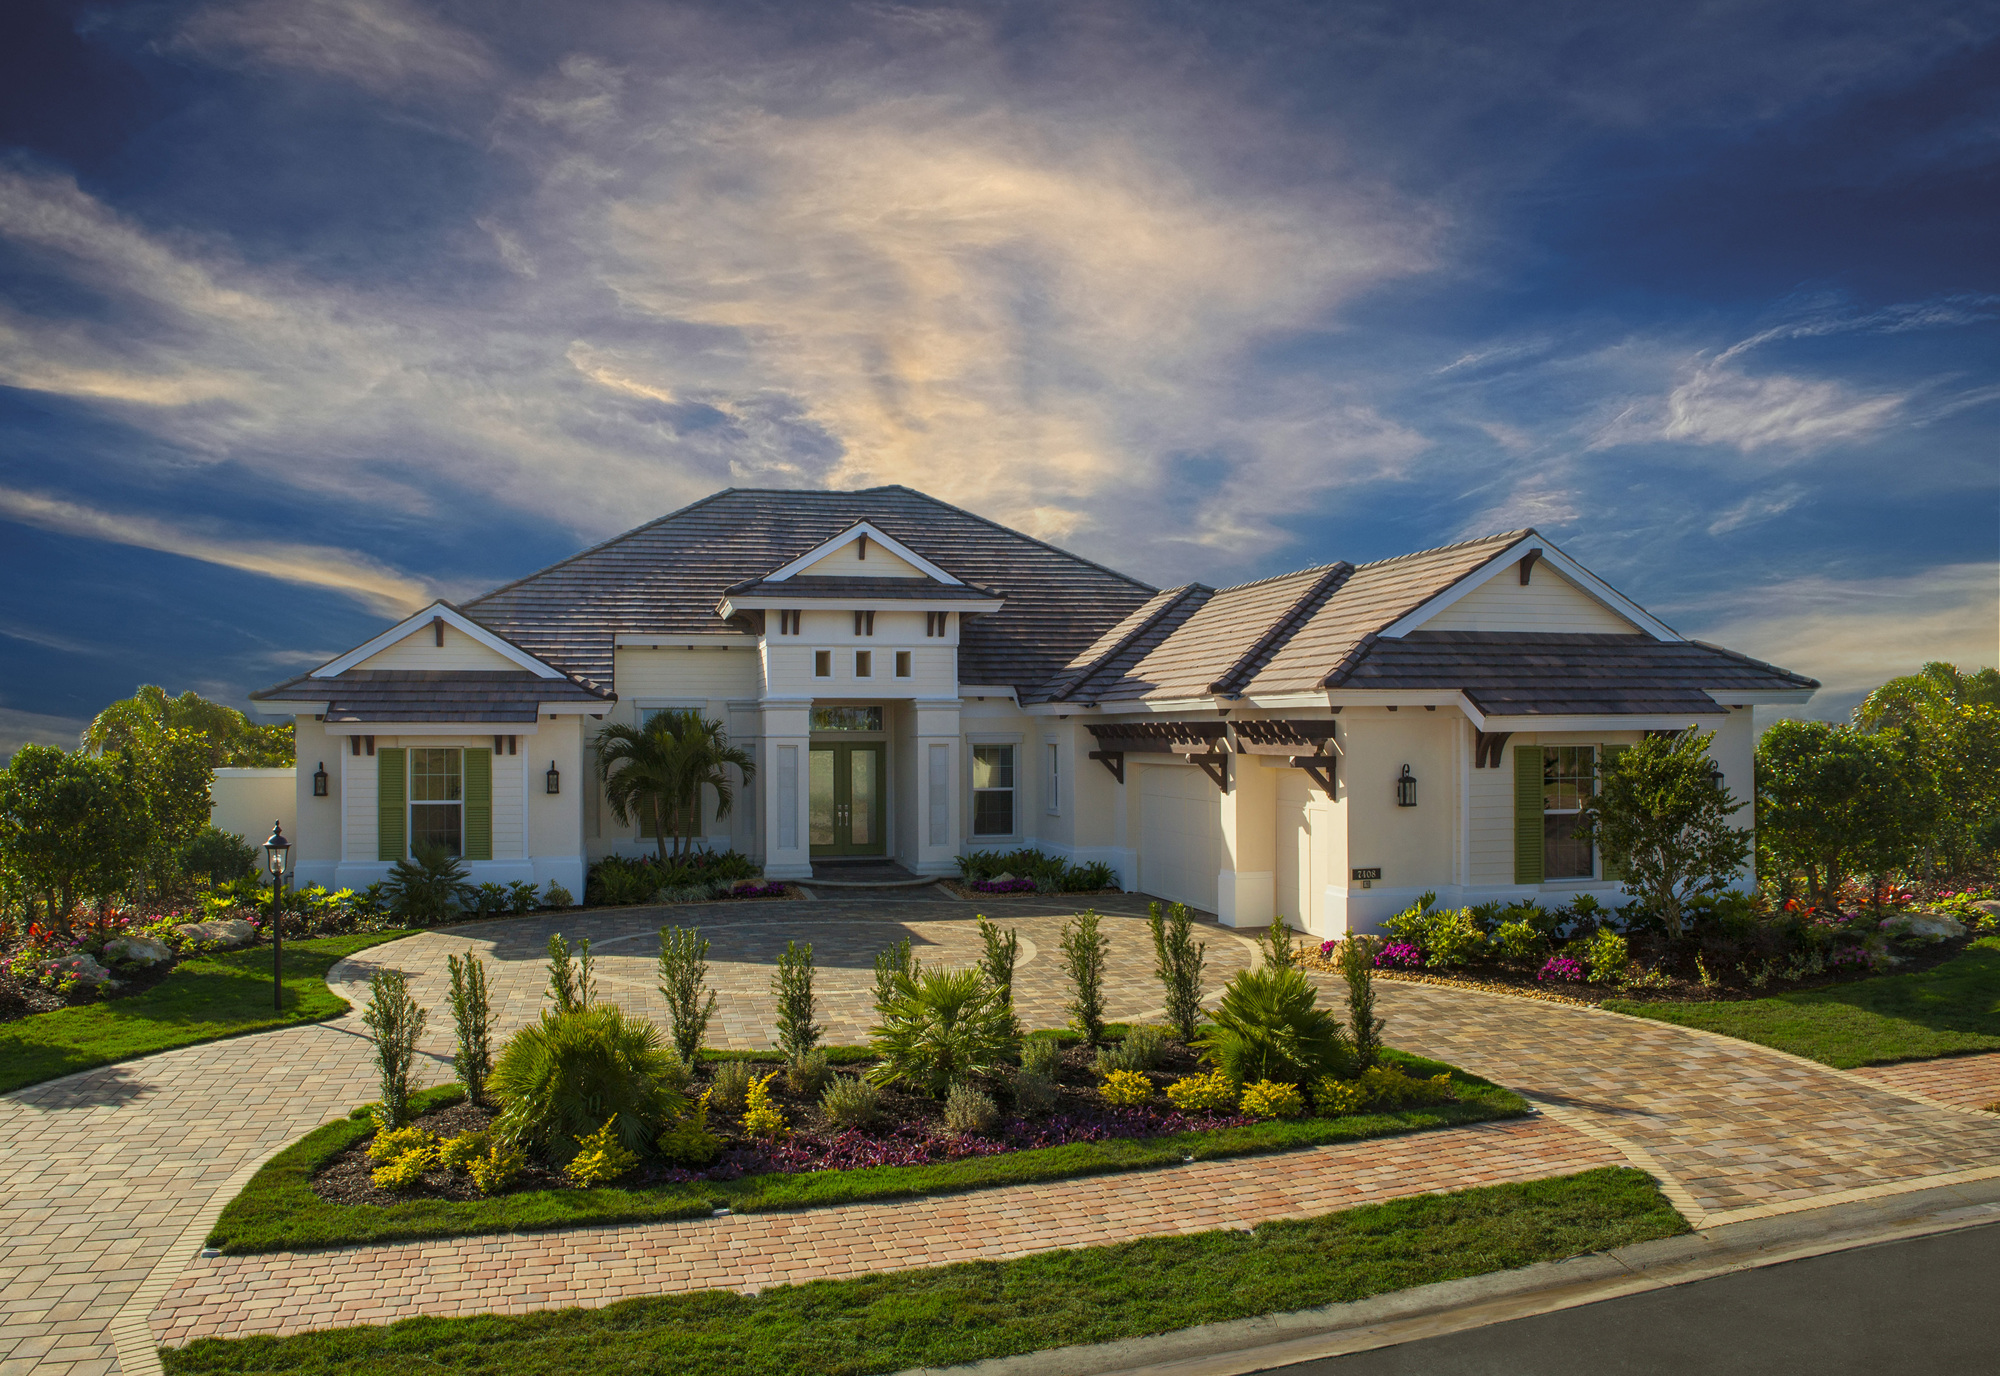 Lee Wetherington Homes' The Windsong model in Seacroft in Country Club East has three bedrooms, four bathrooms and 3,677 square feet. Courtesy image.